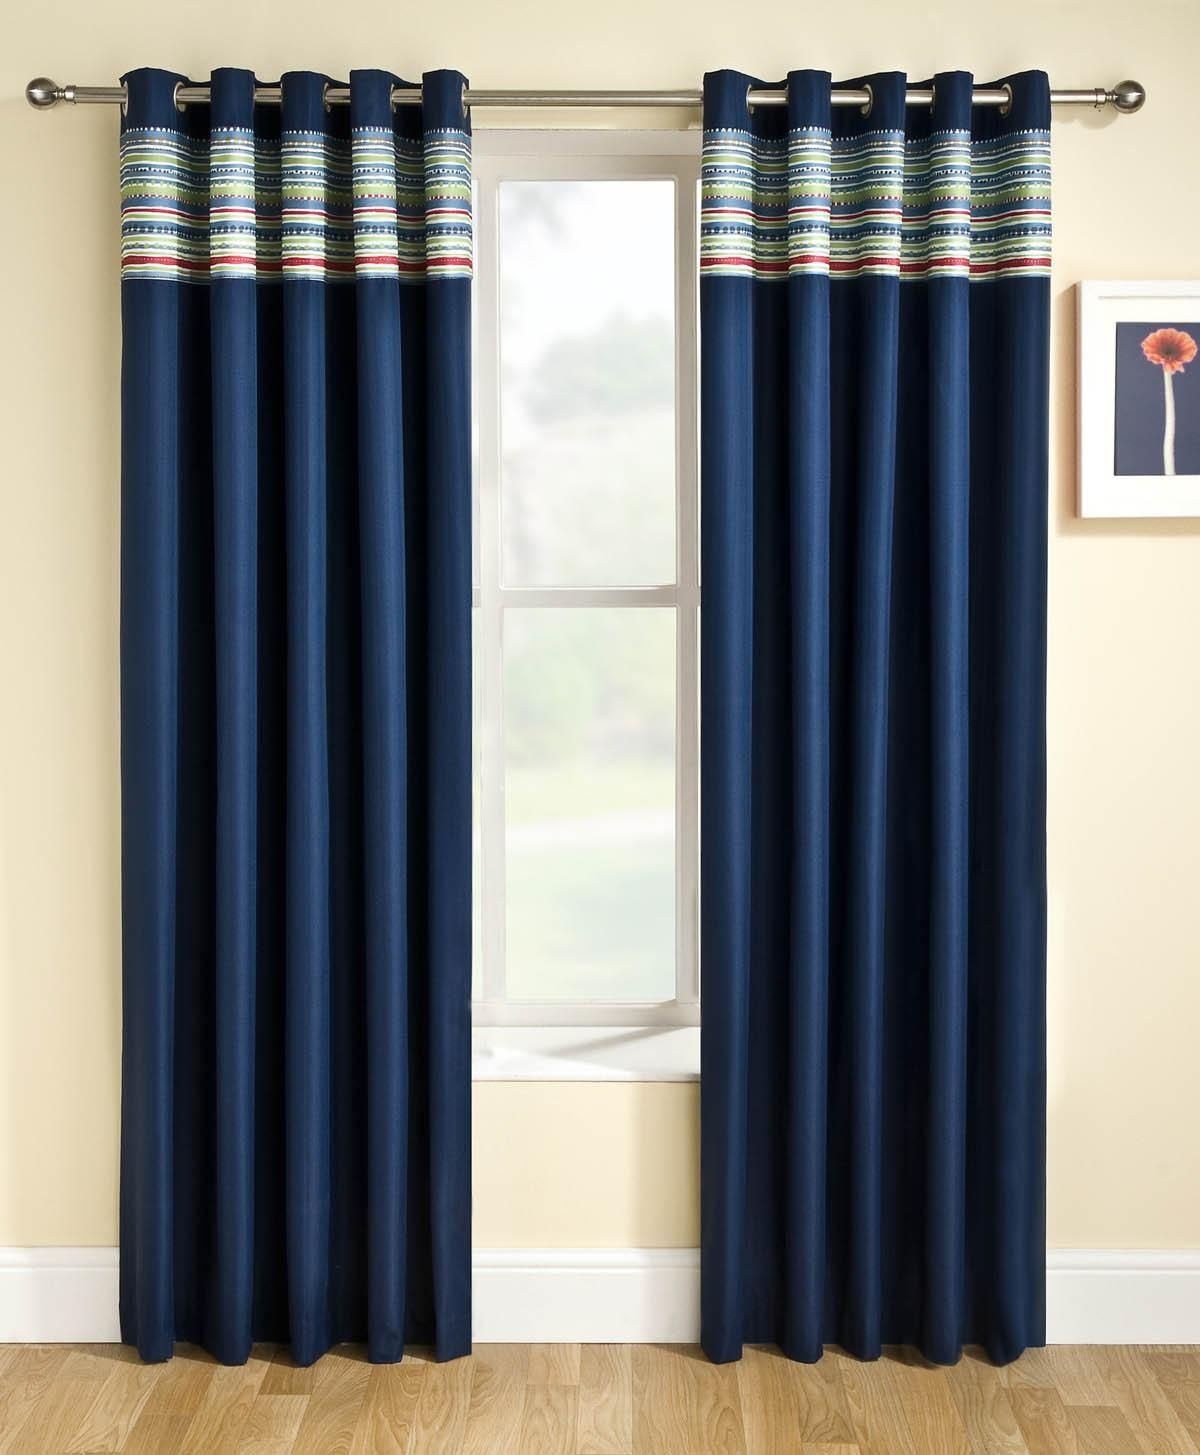 Navy Blue Curtains For Bedroom Pierpointsprings Within Blue Curtains For Bedroom (View 3 of 25)